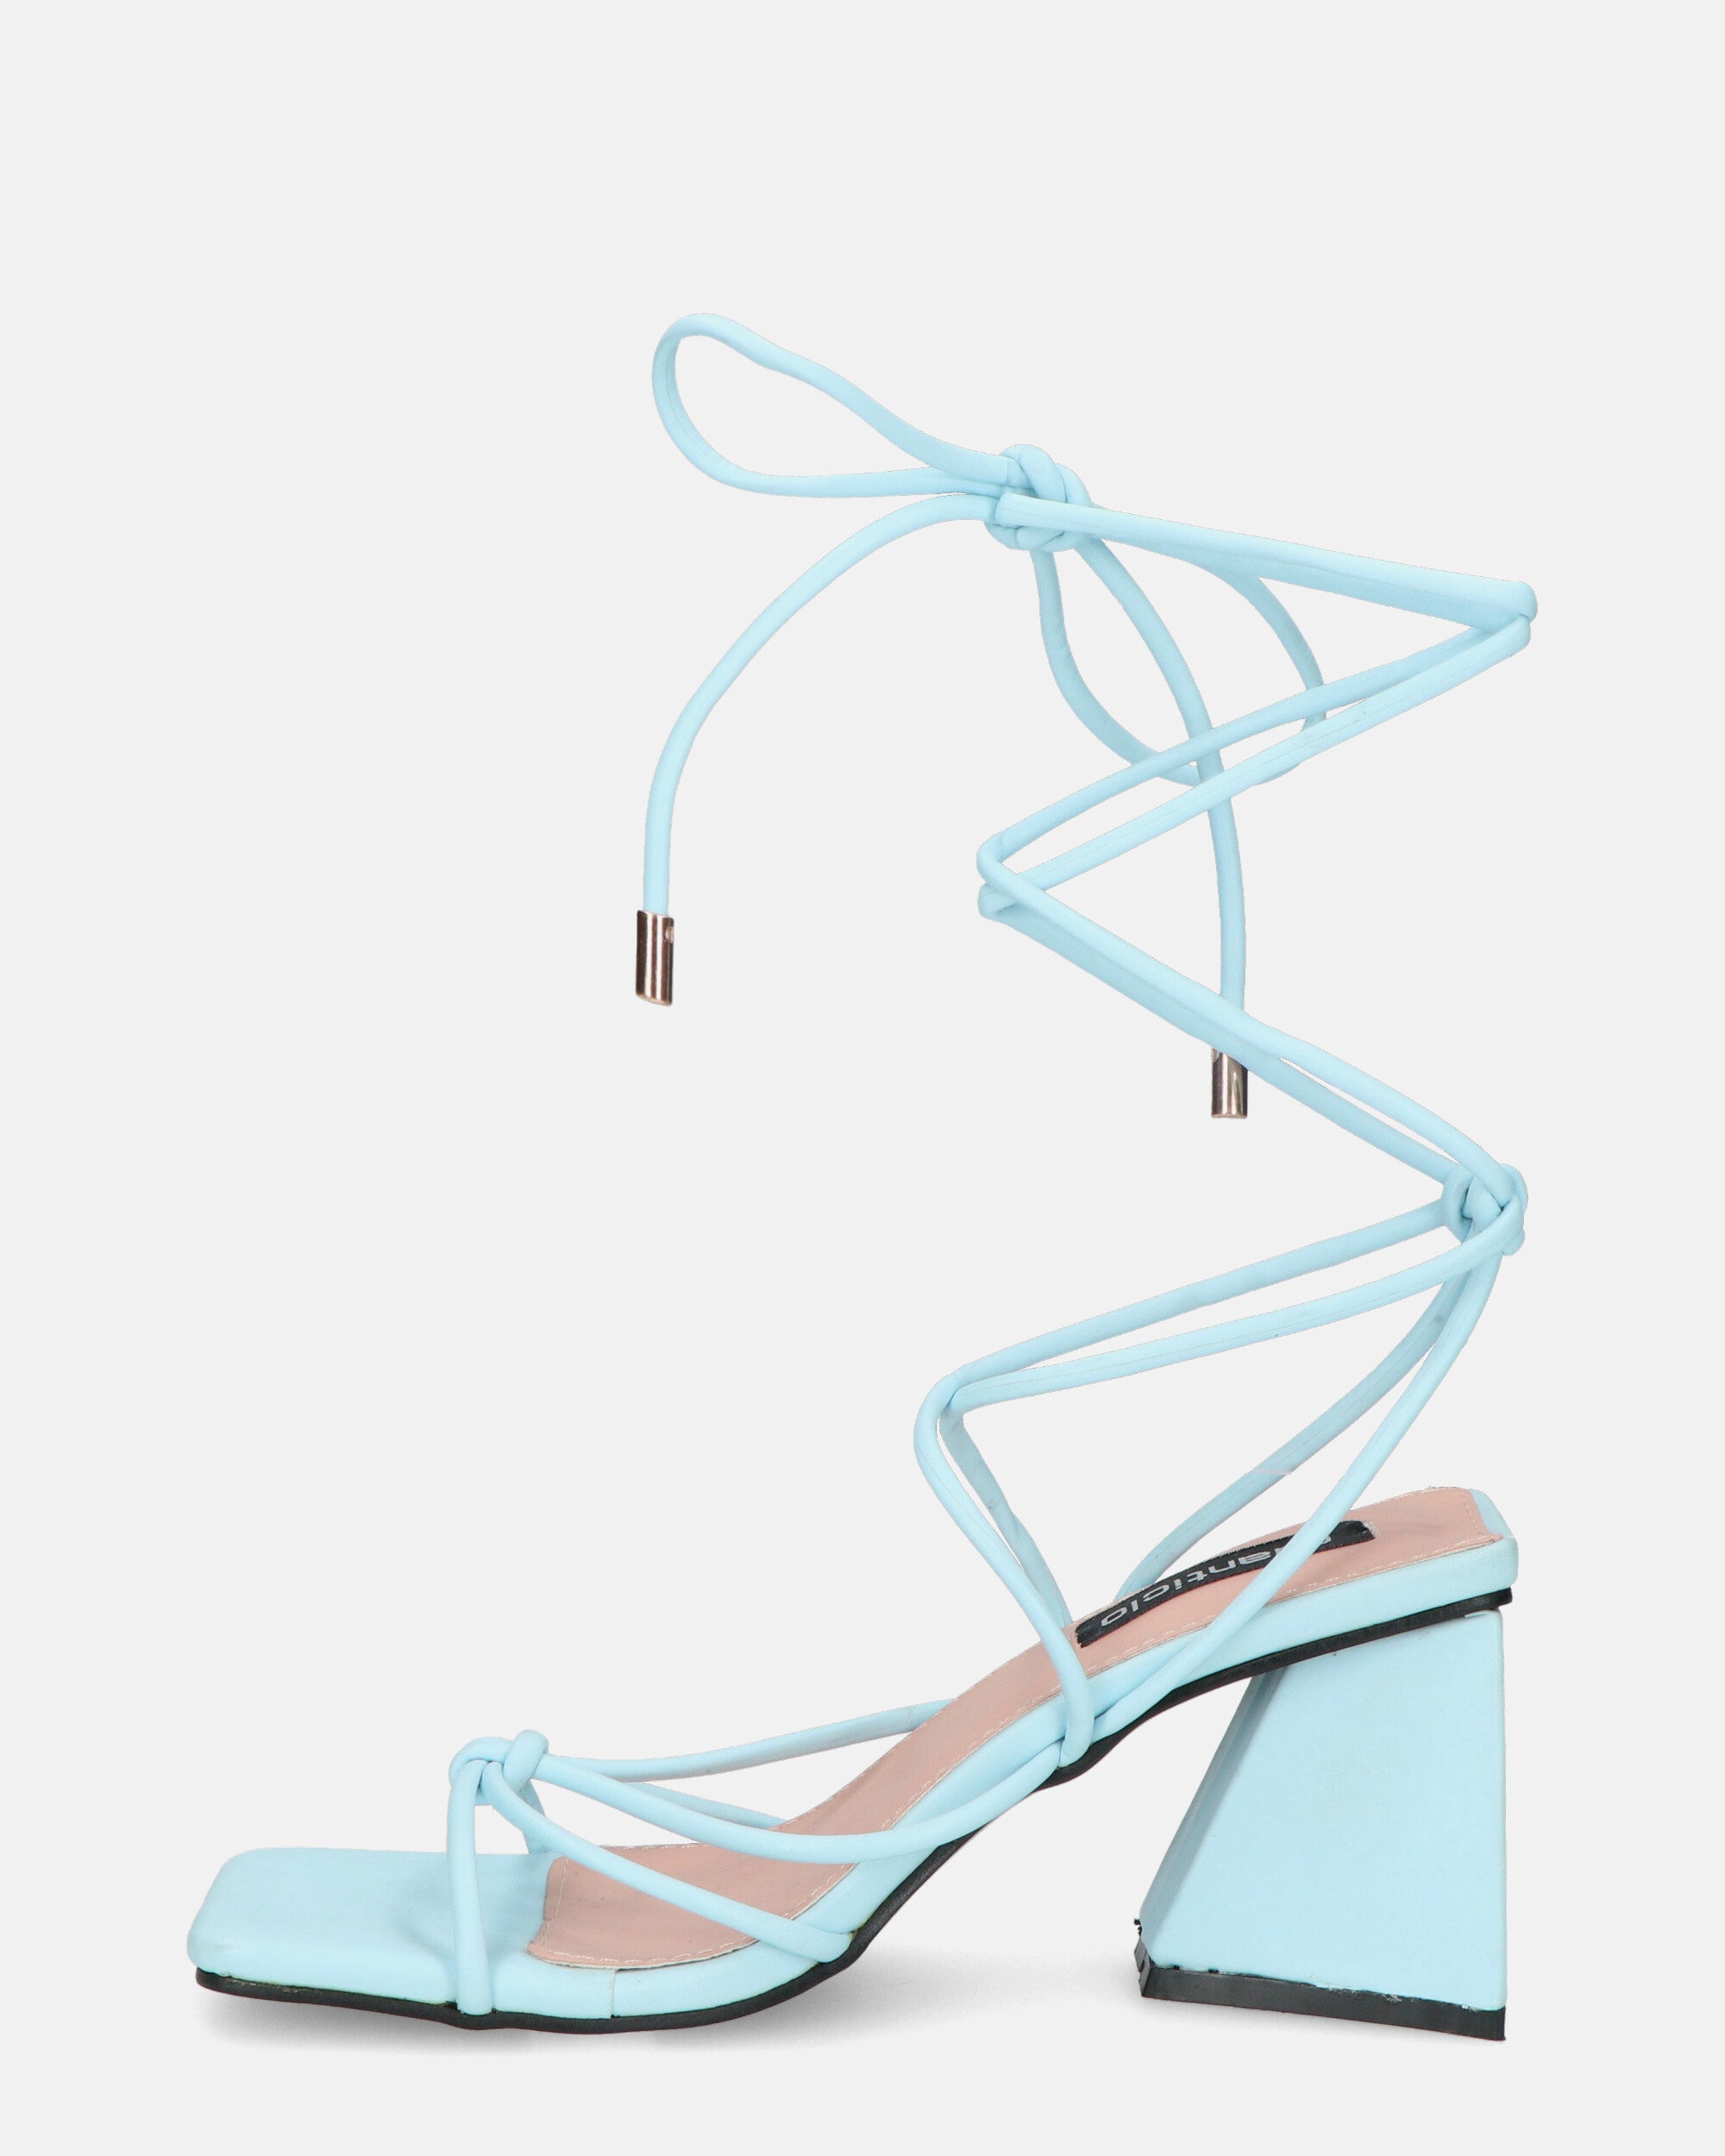 MELISA - sandals with laces in blue PU